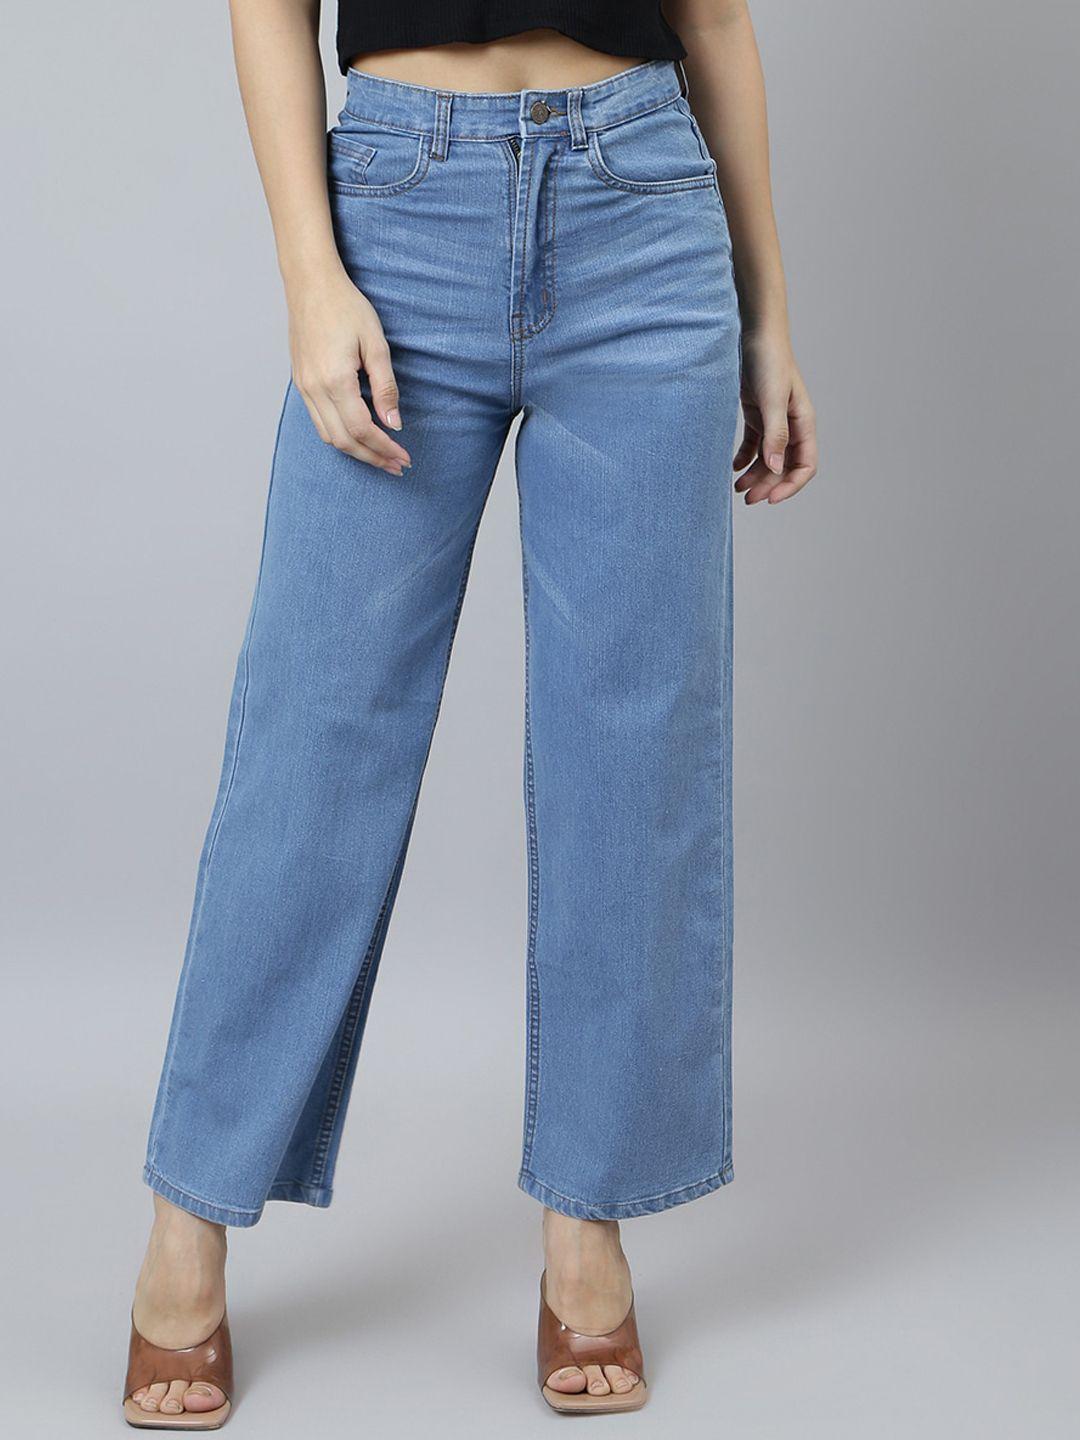 guti-women-cotton-flared-high-rise-stretchable-jeans